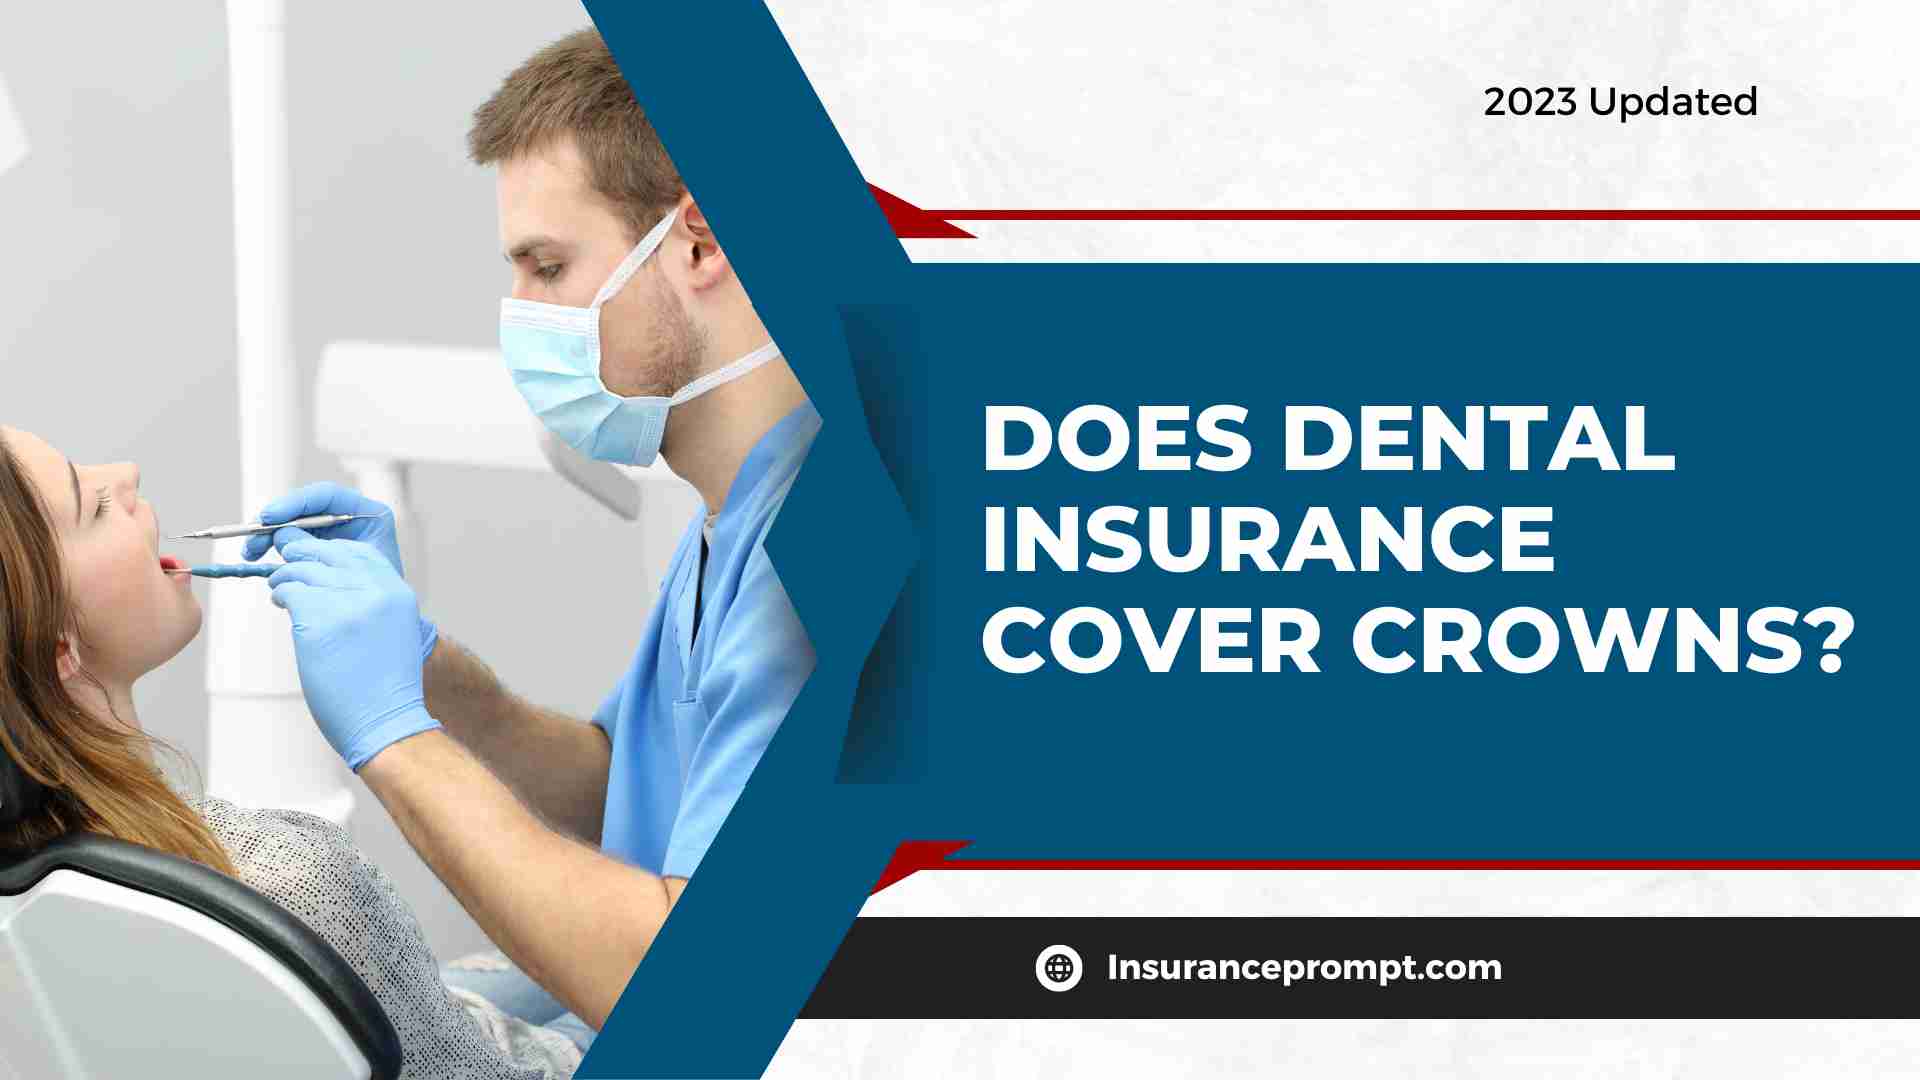 Does Dental Insurance Cover Crowns?